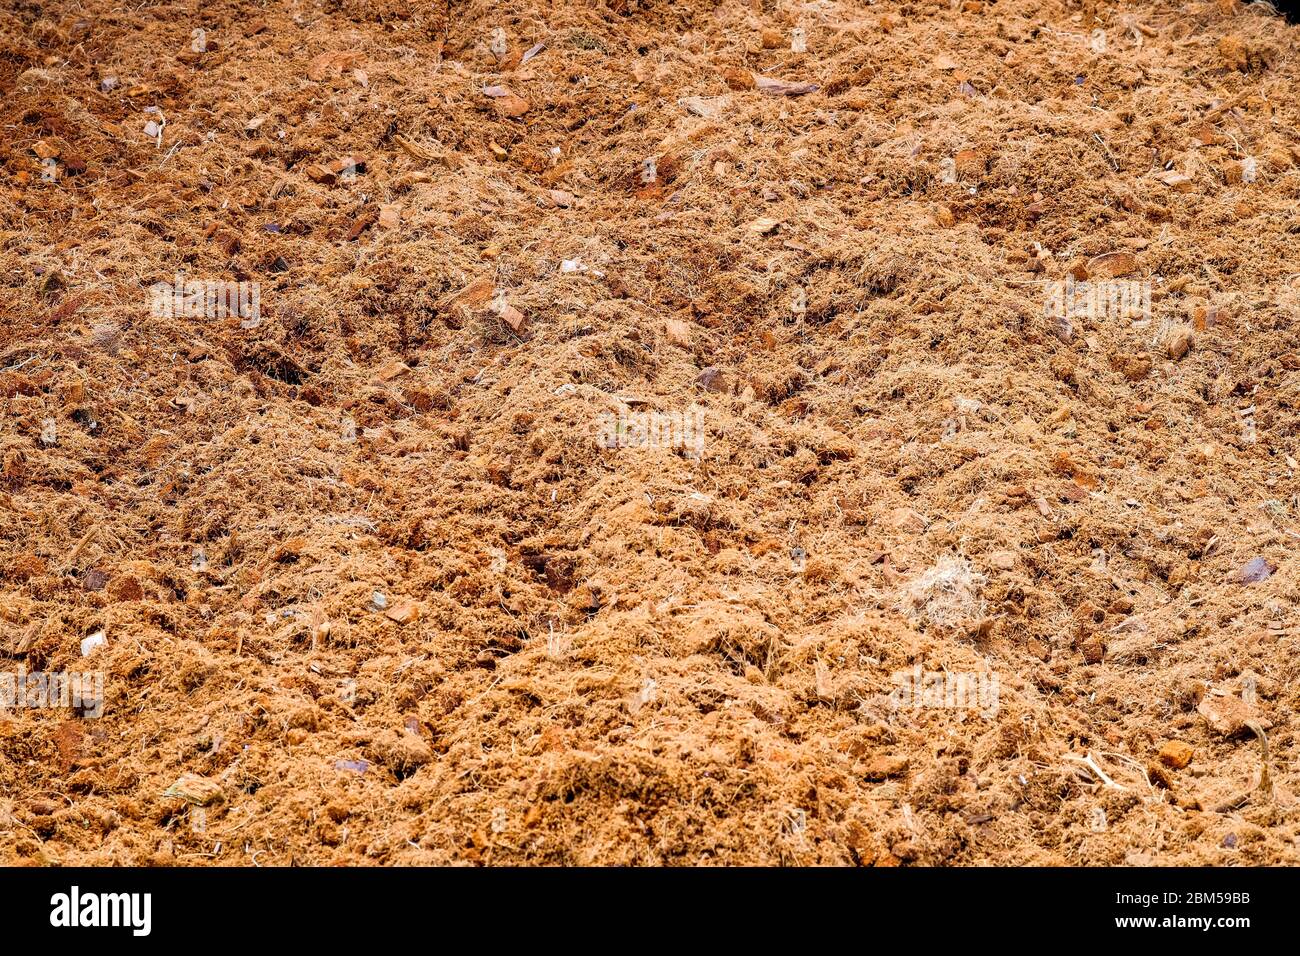 Soil for cultivation, with a mixture of fertilizer and Coconut husk to make food for plants Stock Photo